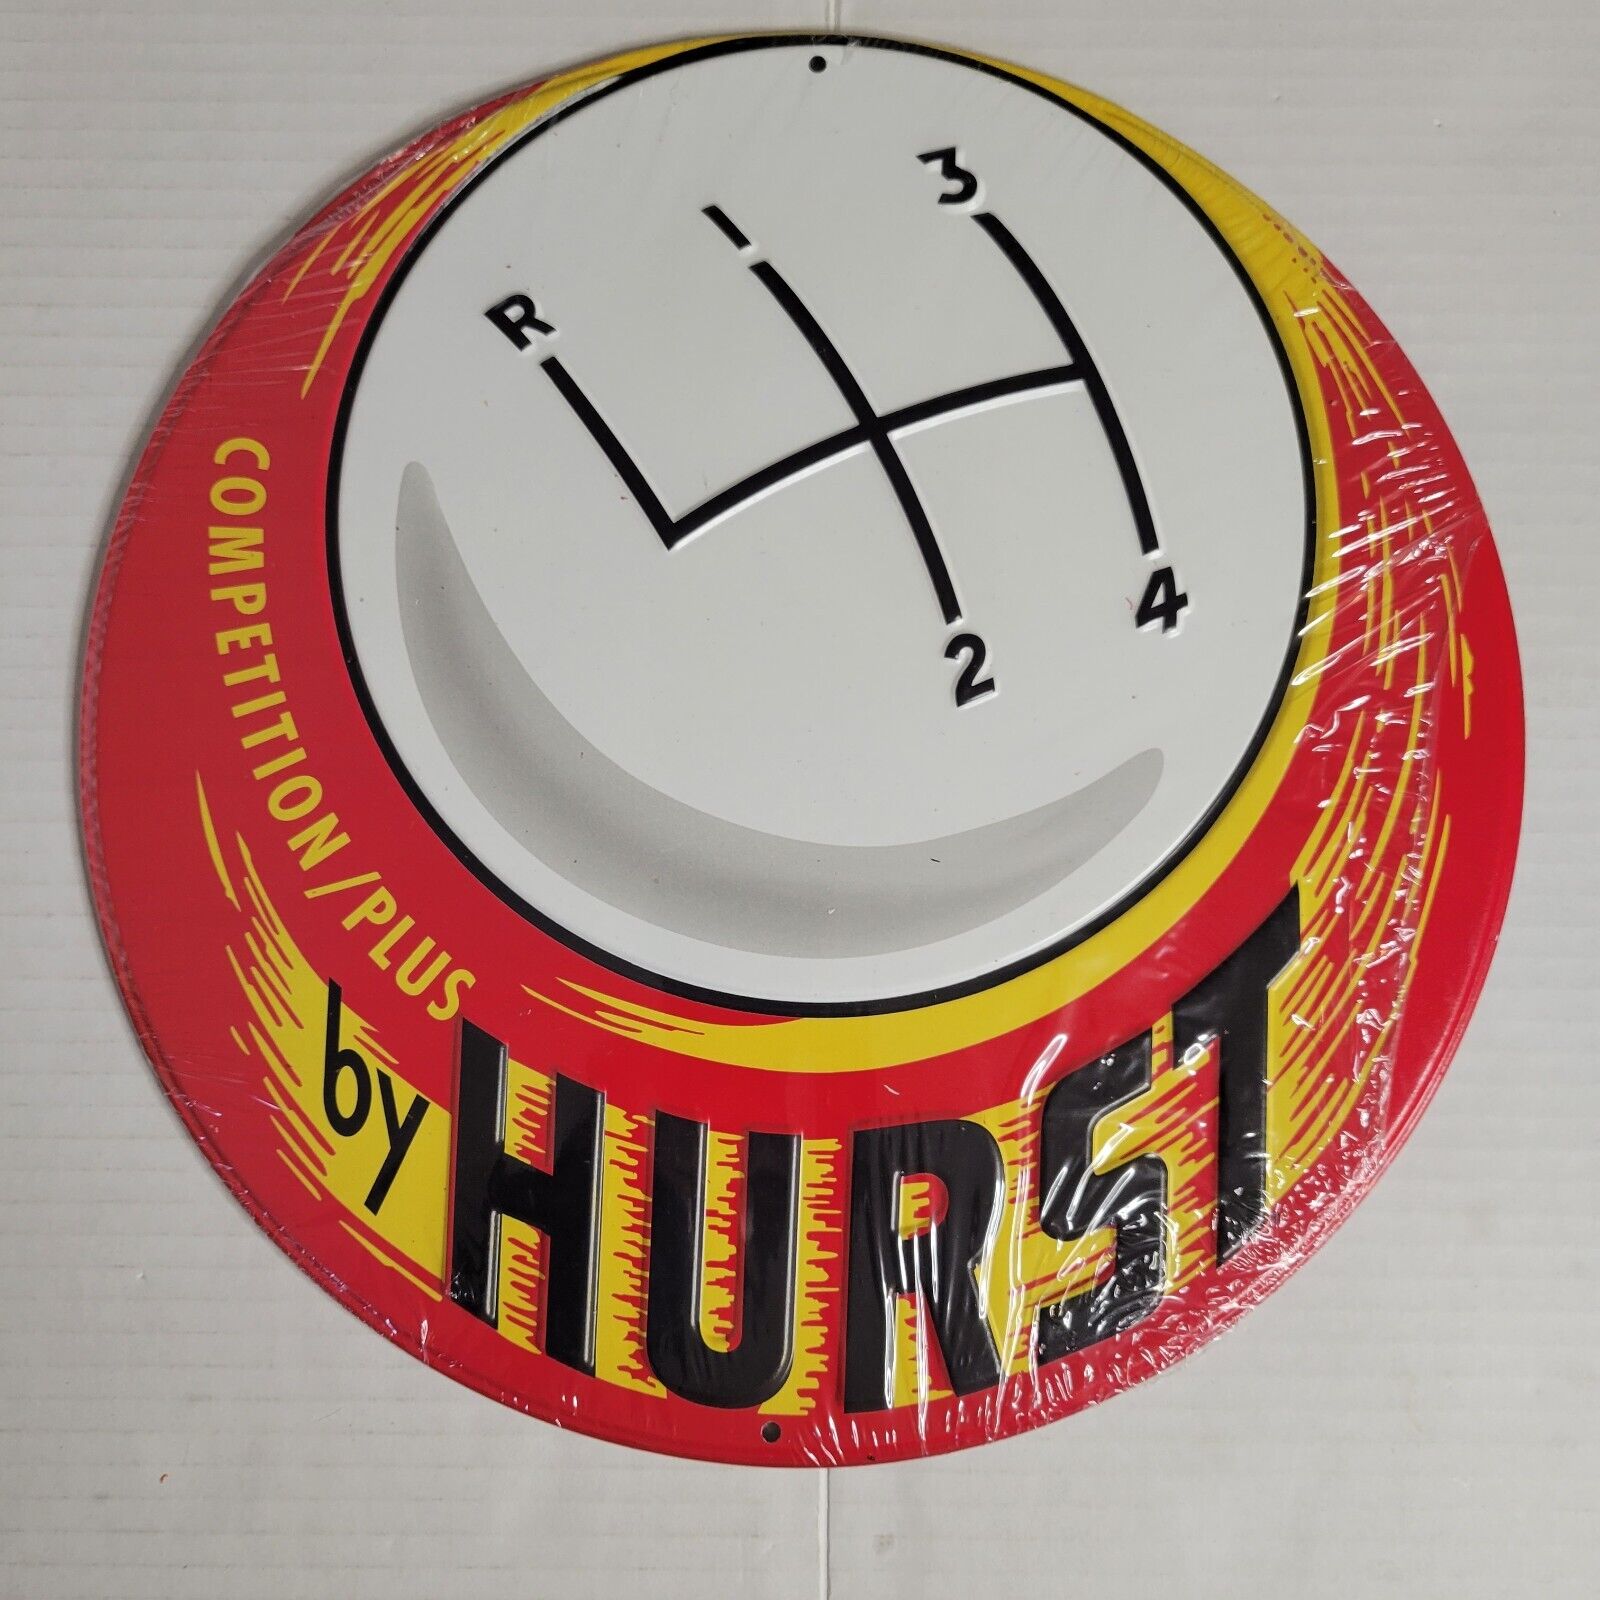 HURST SHIFTER 12” DIAMETER METAL SIGN NIP COMPETITION PLUS 4-SPEED BY HURST